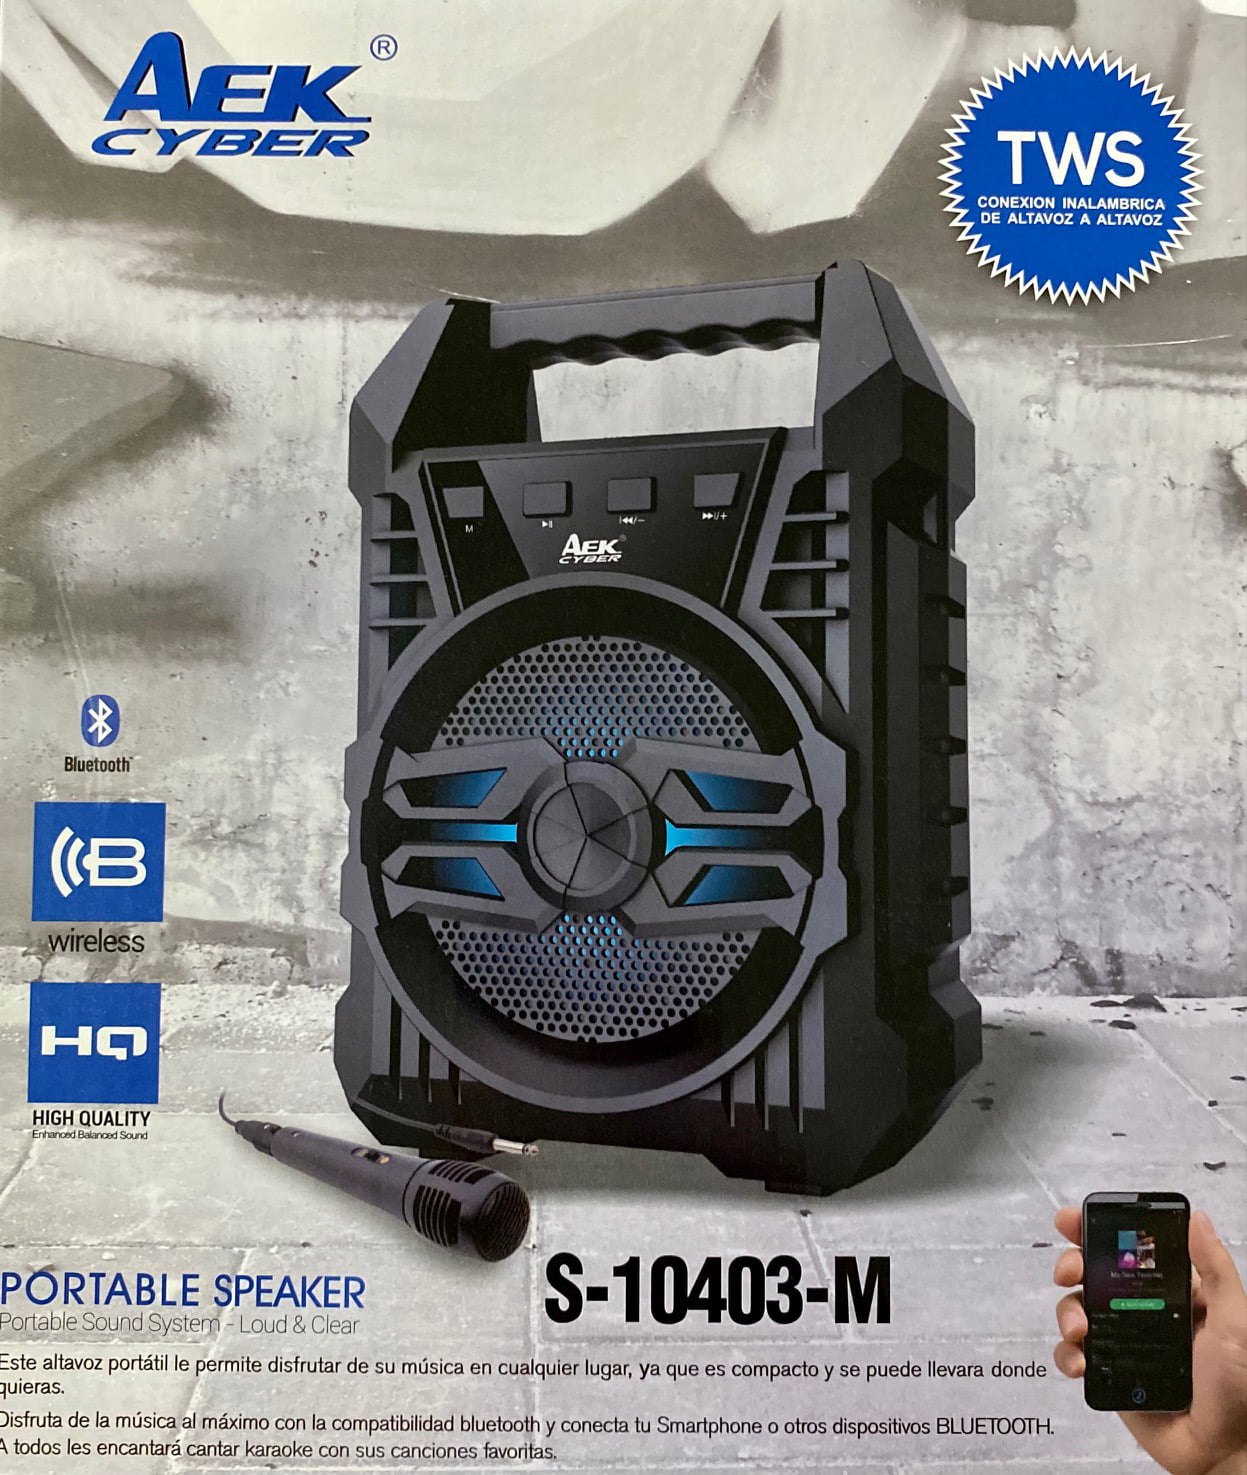 TWS Extra Bass Remote Rechargeable Wireless Mic Bluetooth Speaker AEK Cyber 12” 